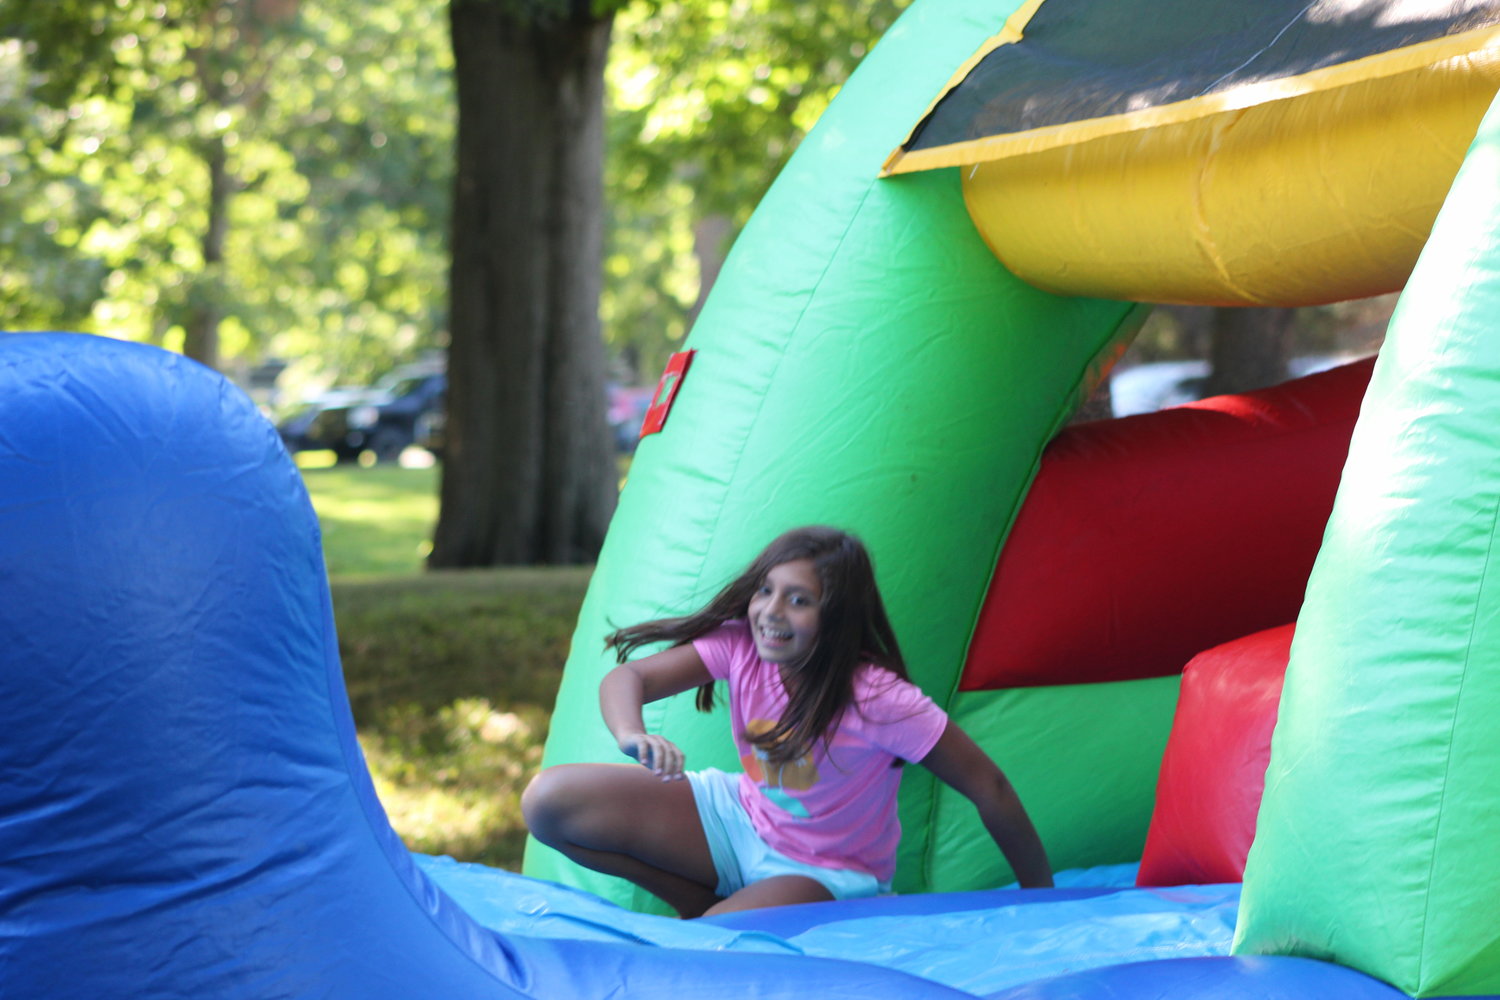 An inflatable obstacle course was a popular attraction.